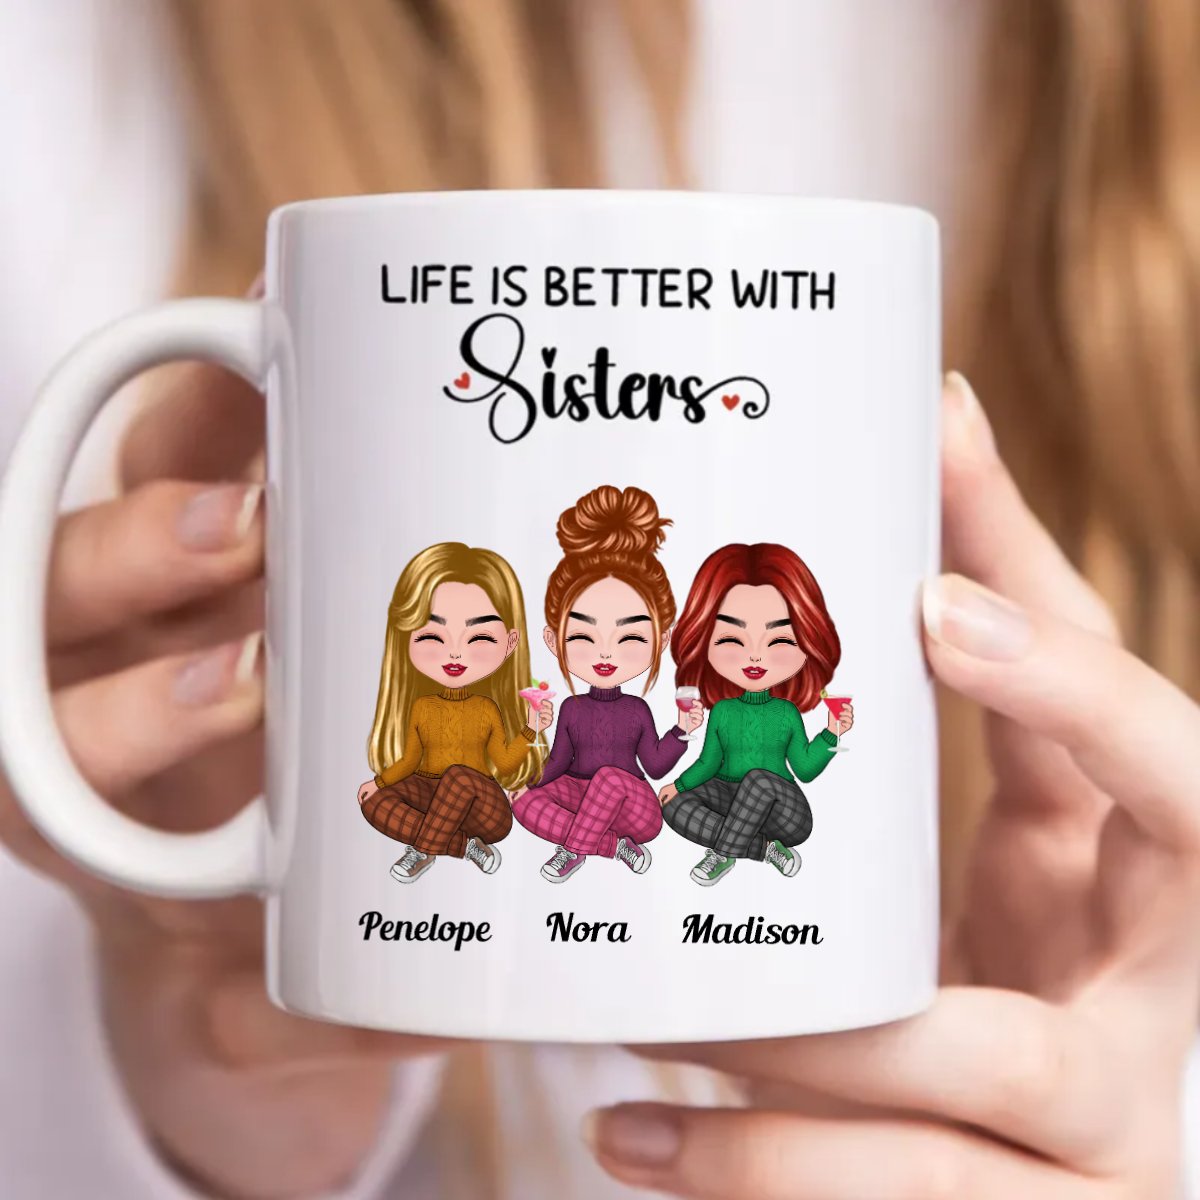 Life Is Better With Sisters - Personalized Mug - The Next Custom Gift